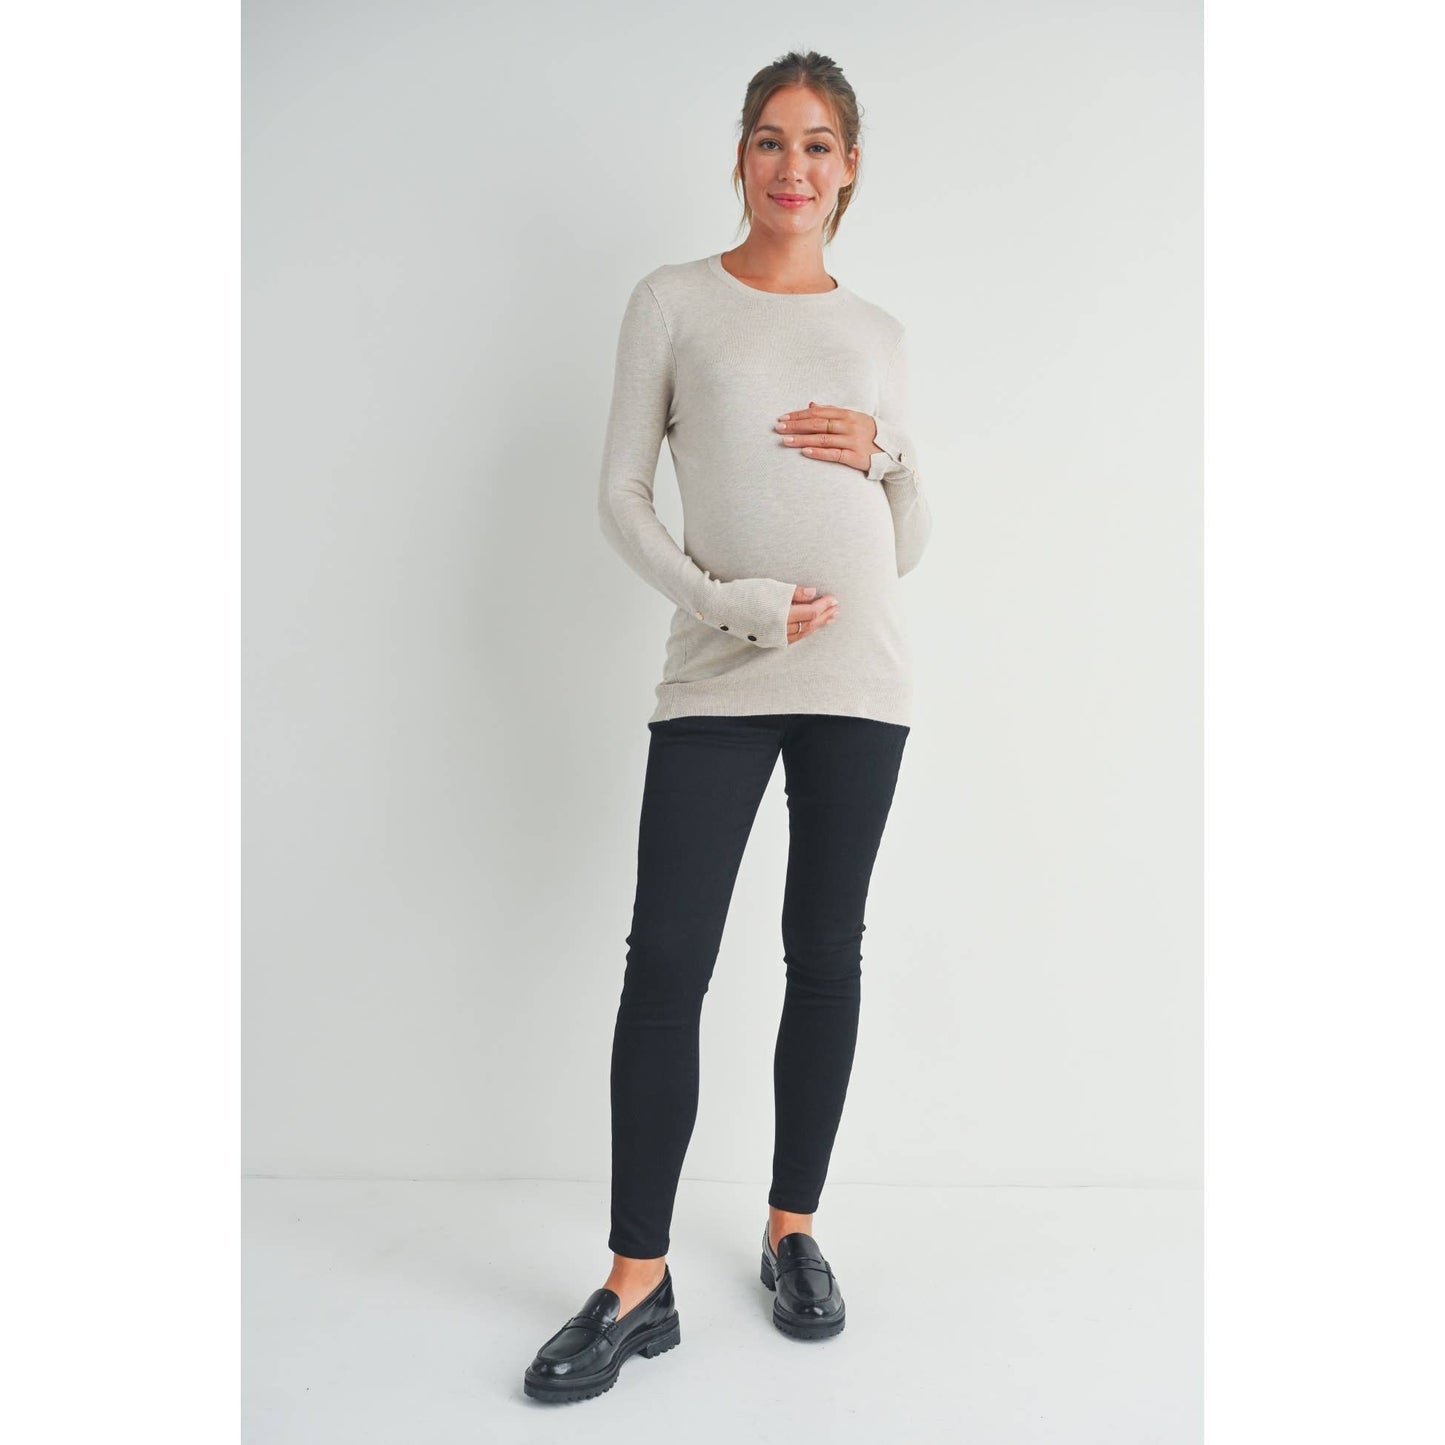 Solid Crewneck Maternity Button Sleeve Sweater